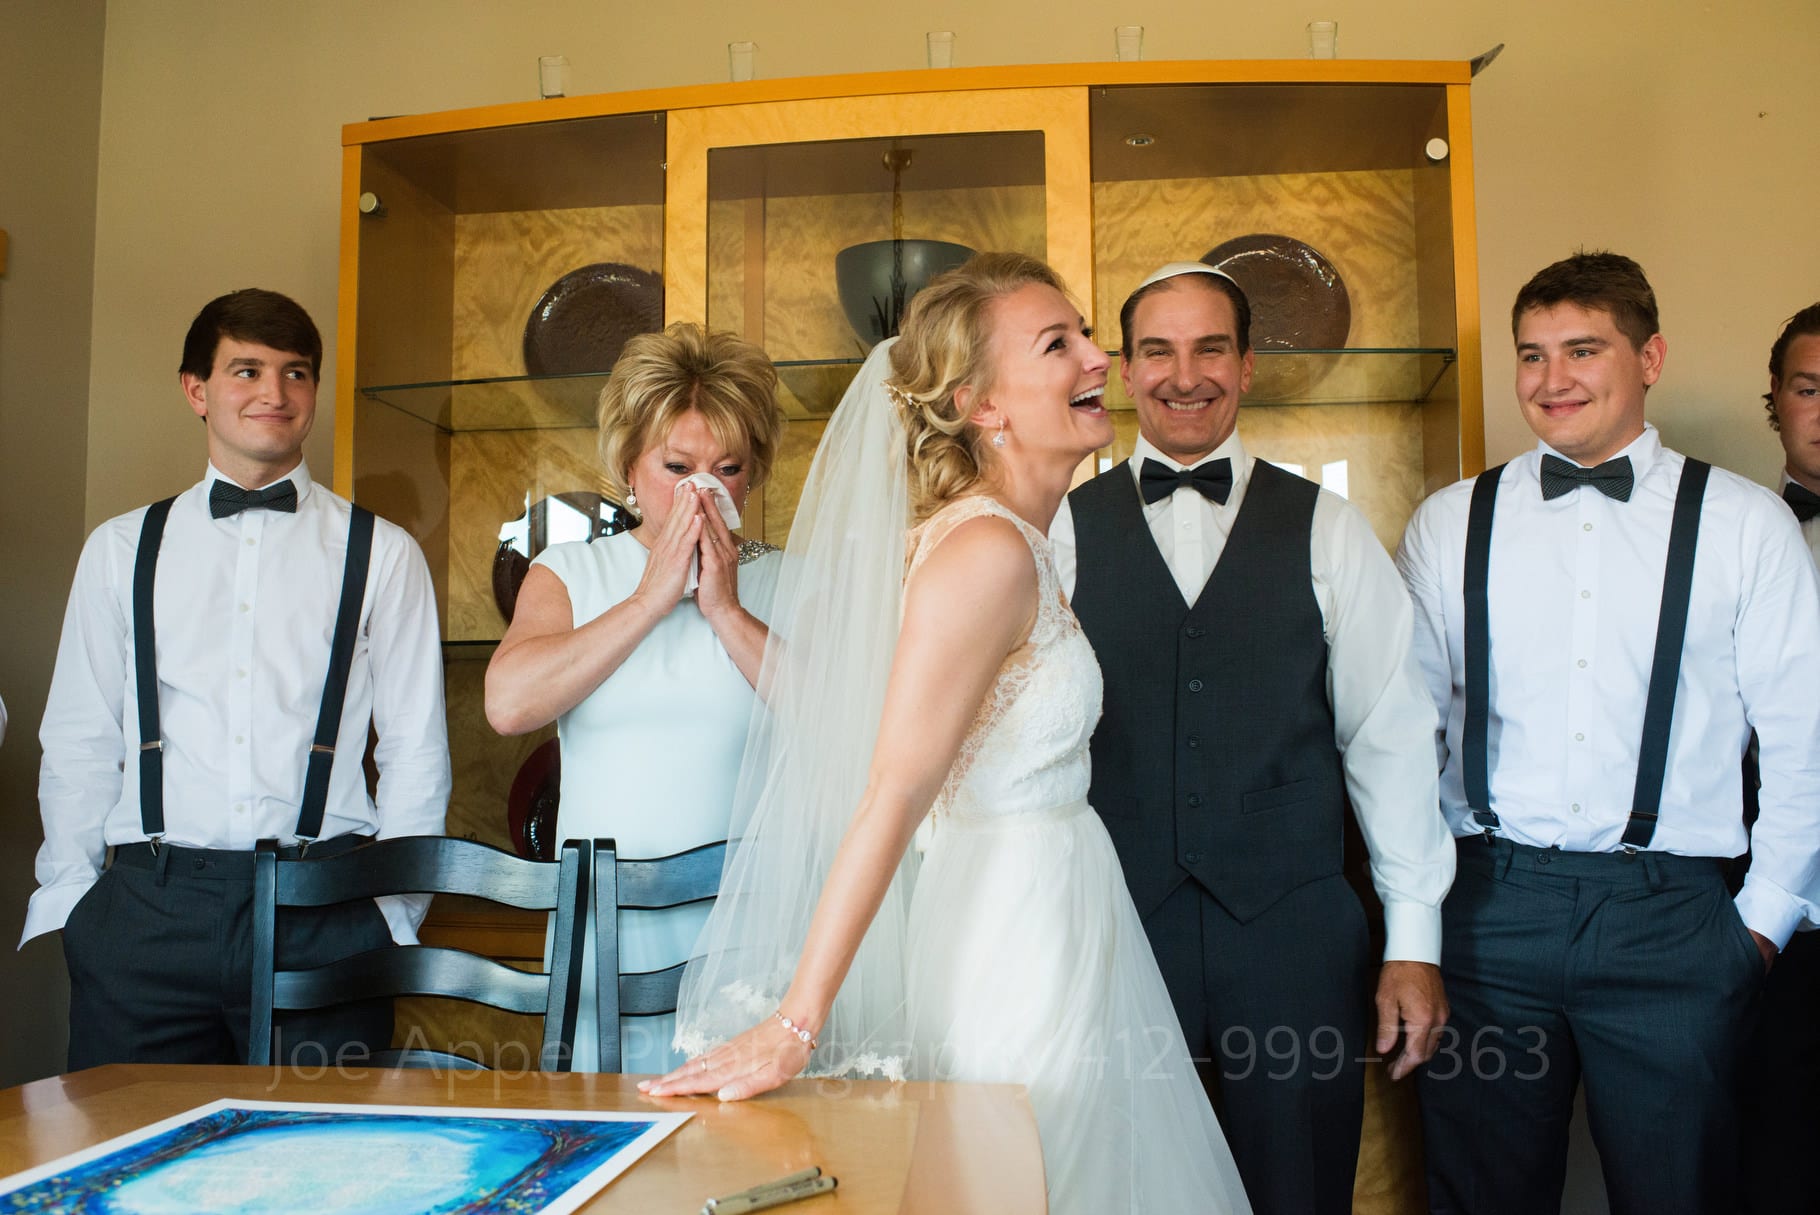 A bride smiles as she rises from a table after signing a blue-colored ketubah. Her mother wipes tears from her eyes while other witnesses smile.